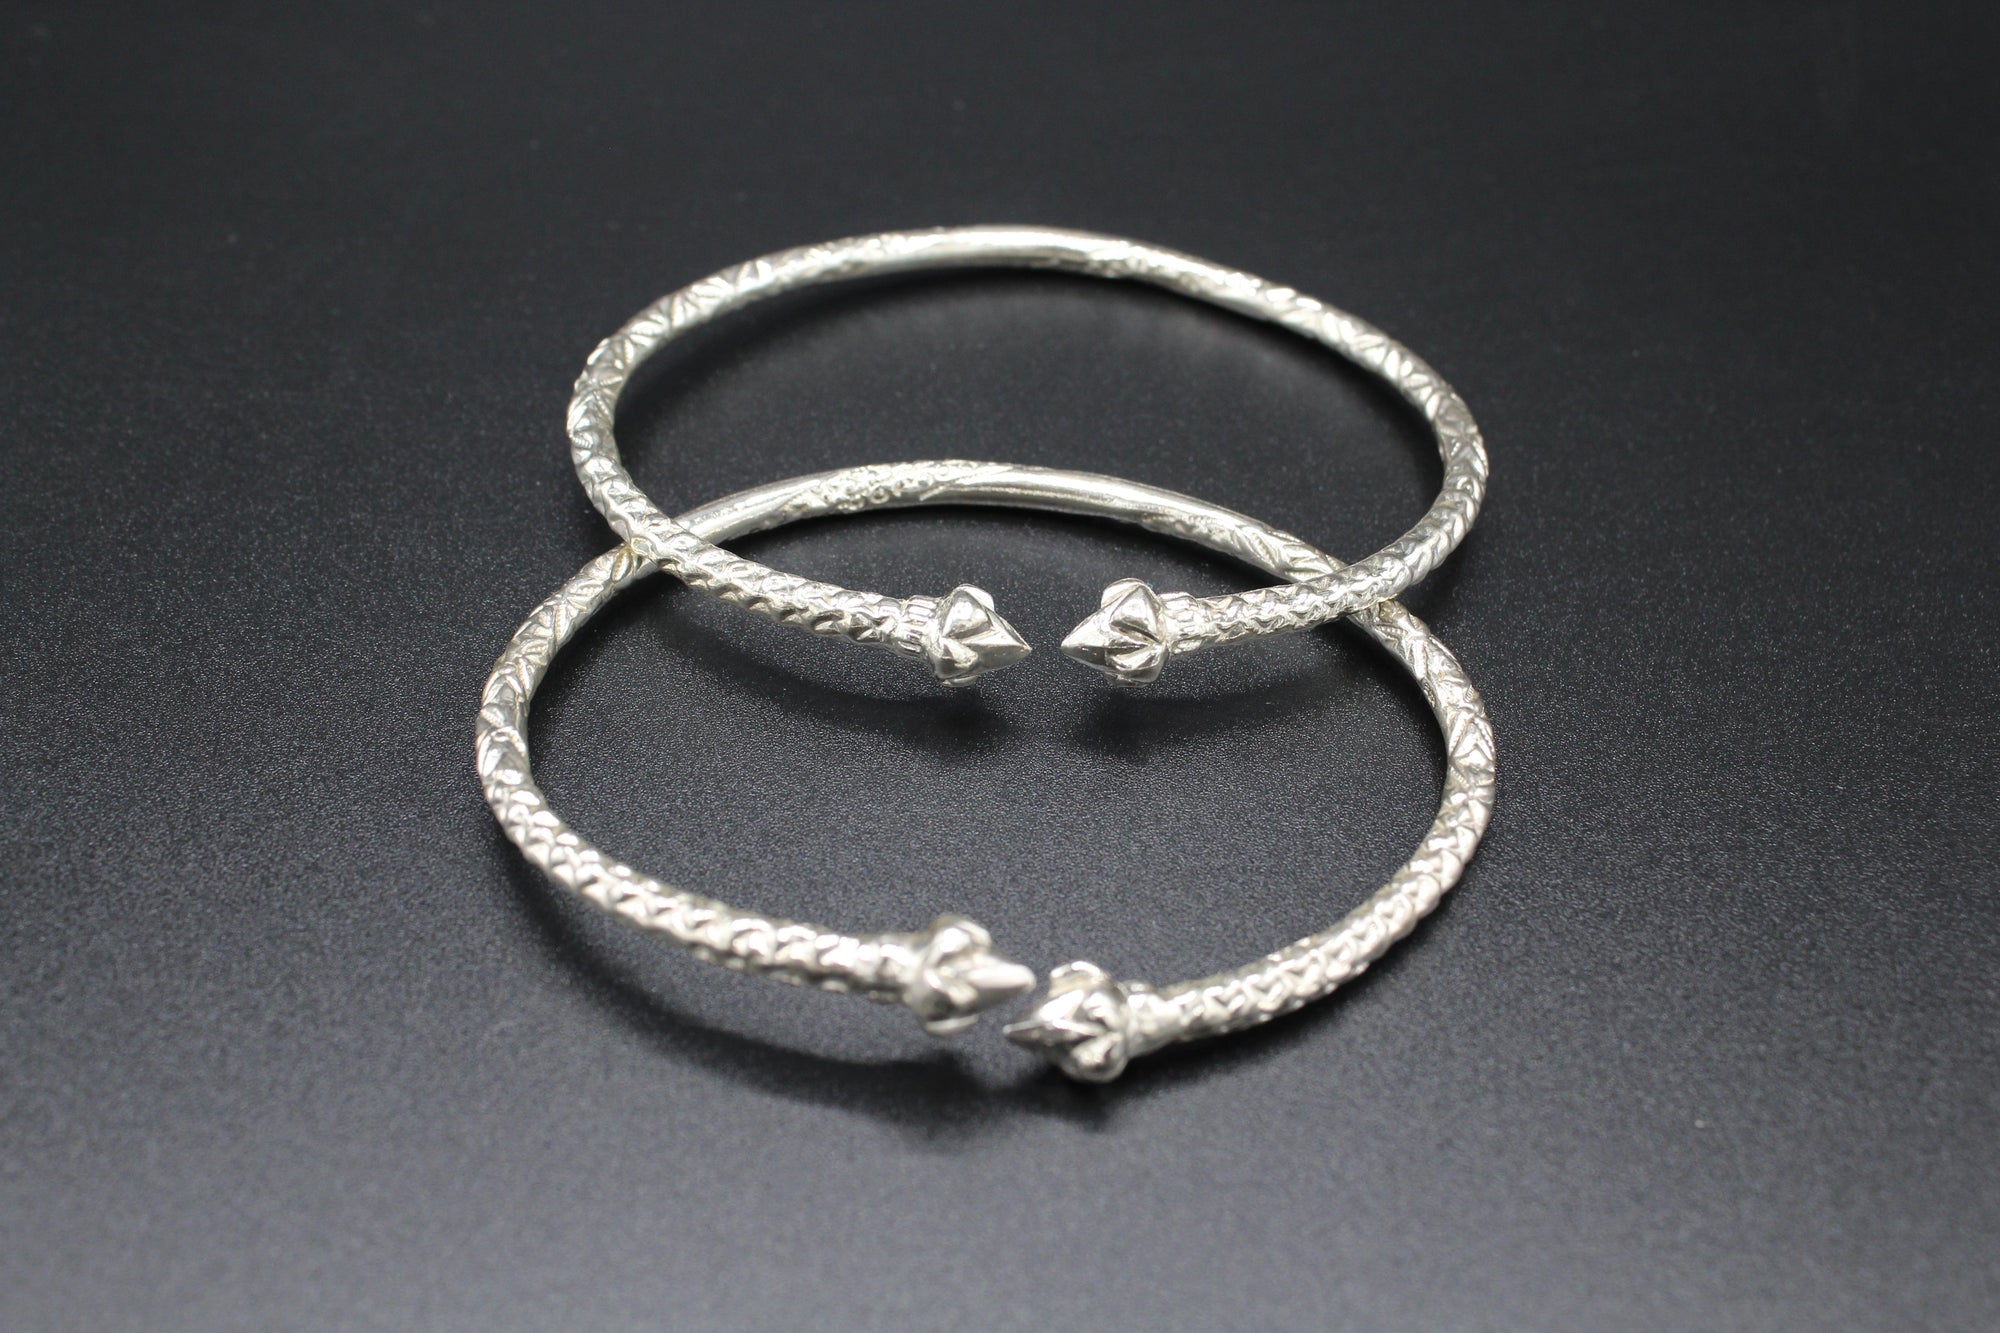 "TORCH ENDS" 925 STERLING SILVER BANGLES